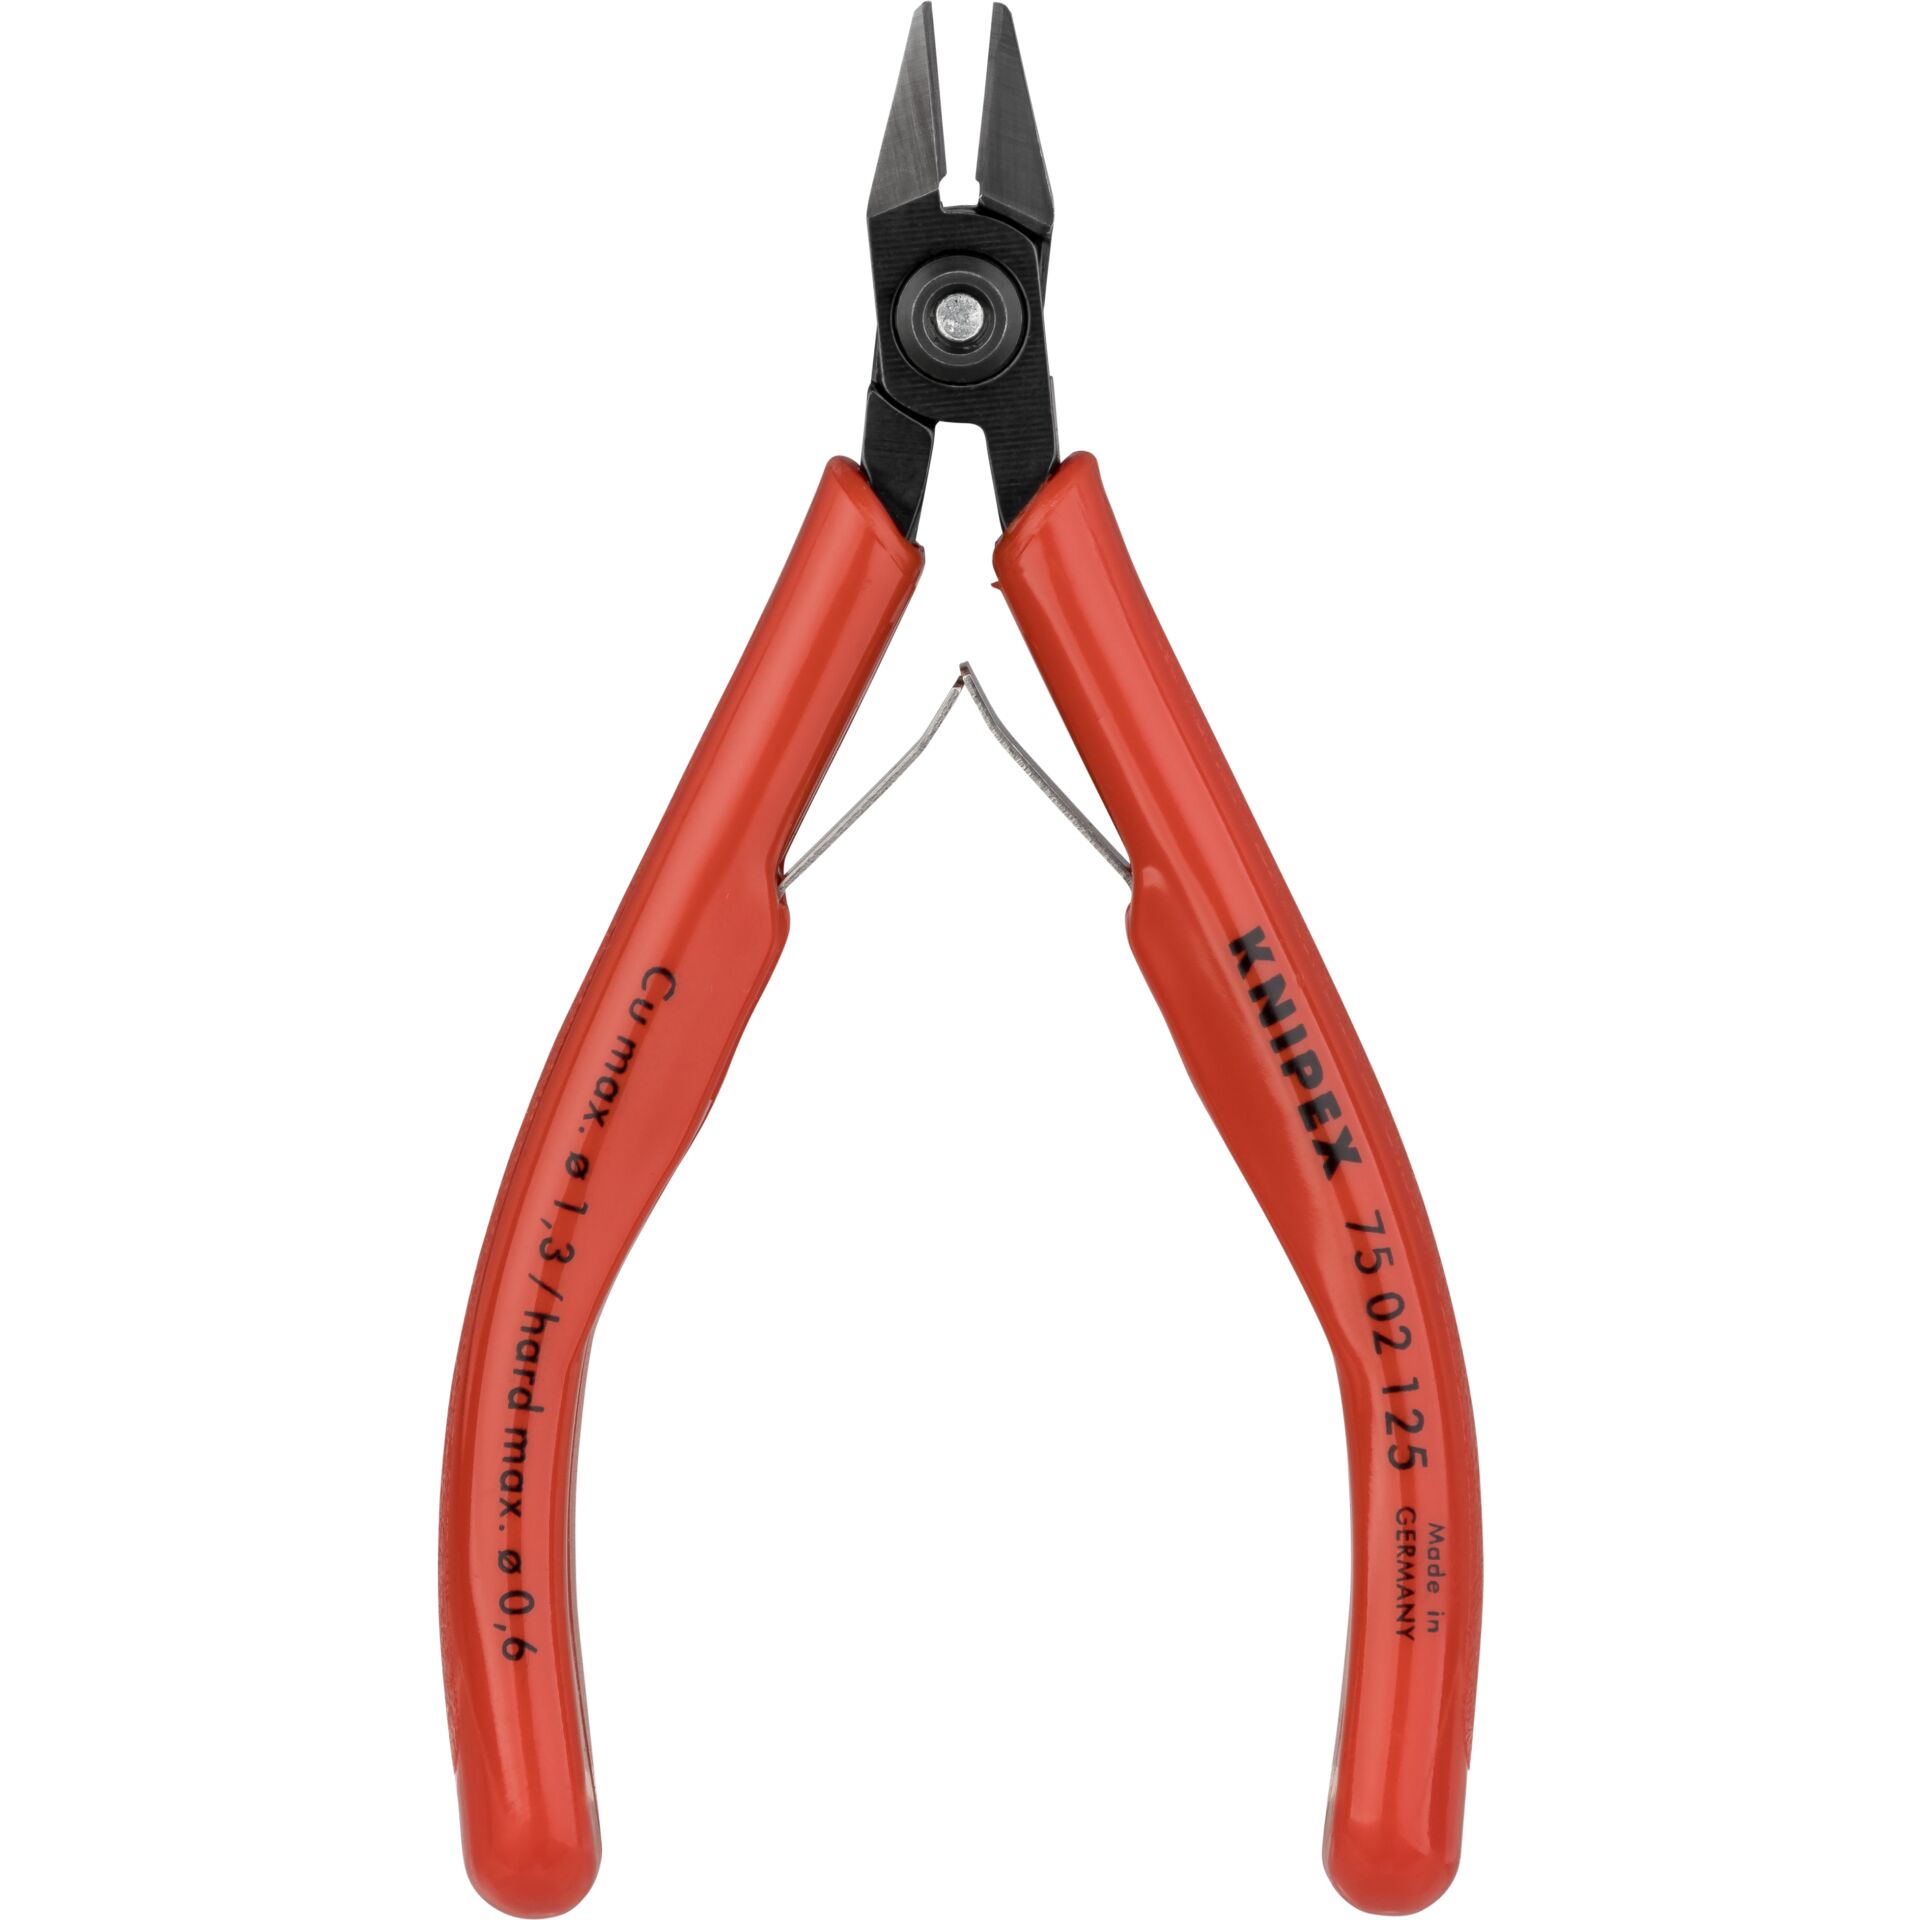 Knipex            tronchese laterale per elettronica